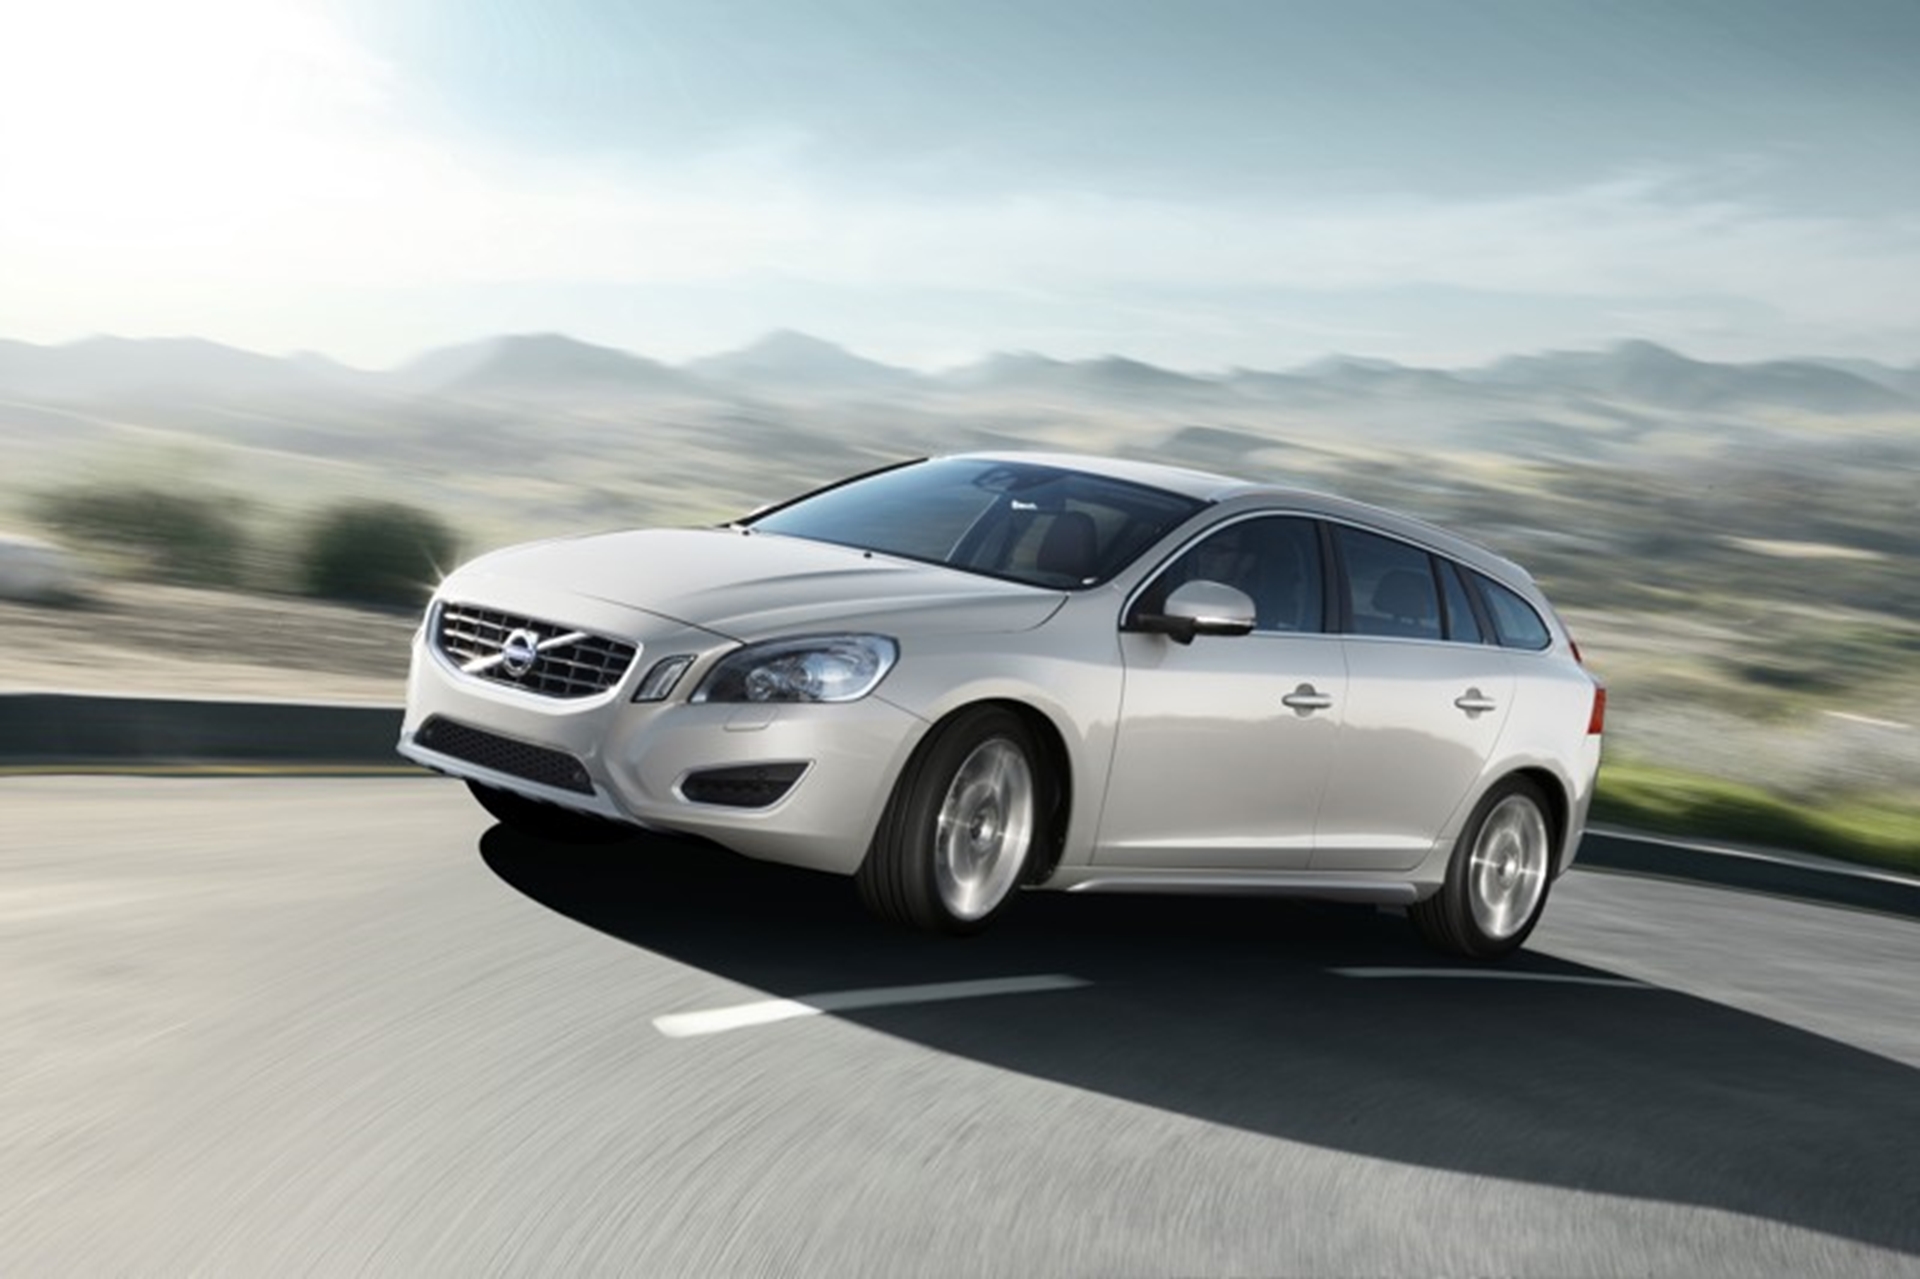 Volvo Price List: Suggested Retail Price List for New Volvo Cars in South Africa 2012